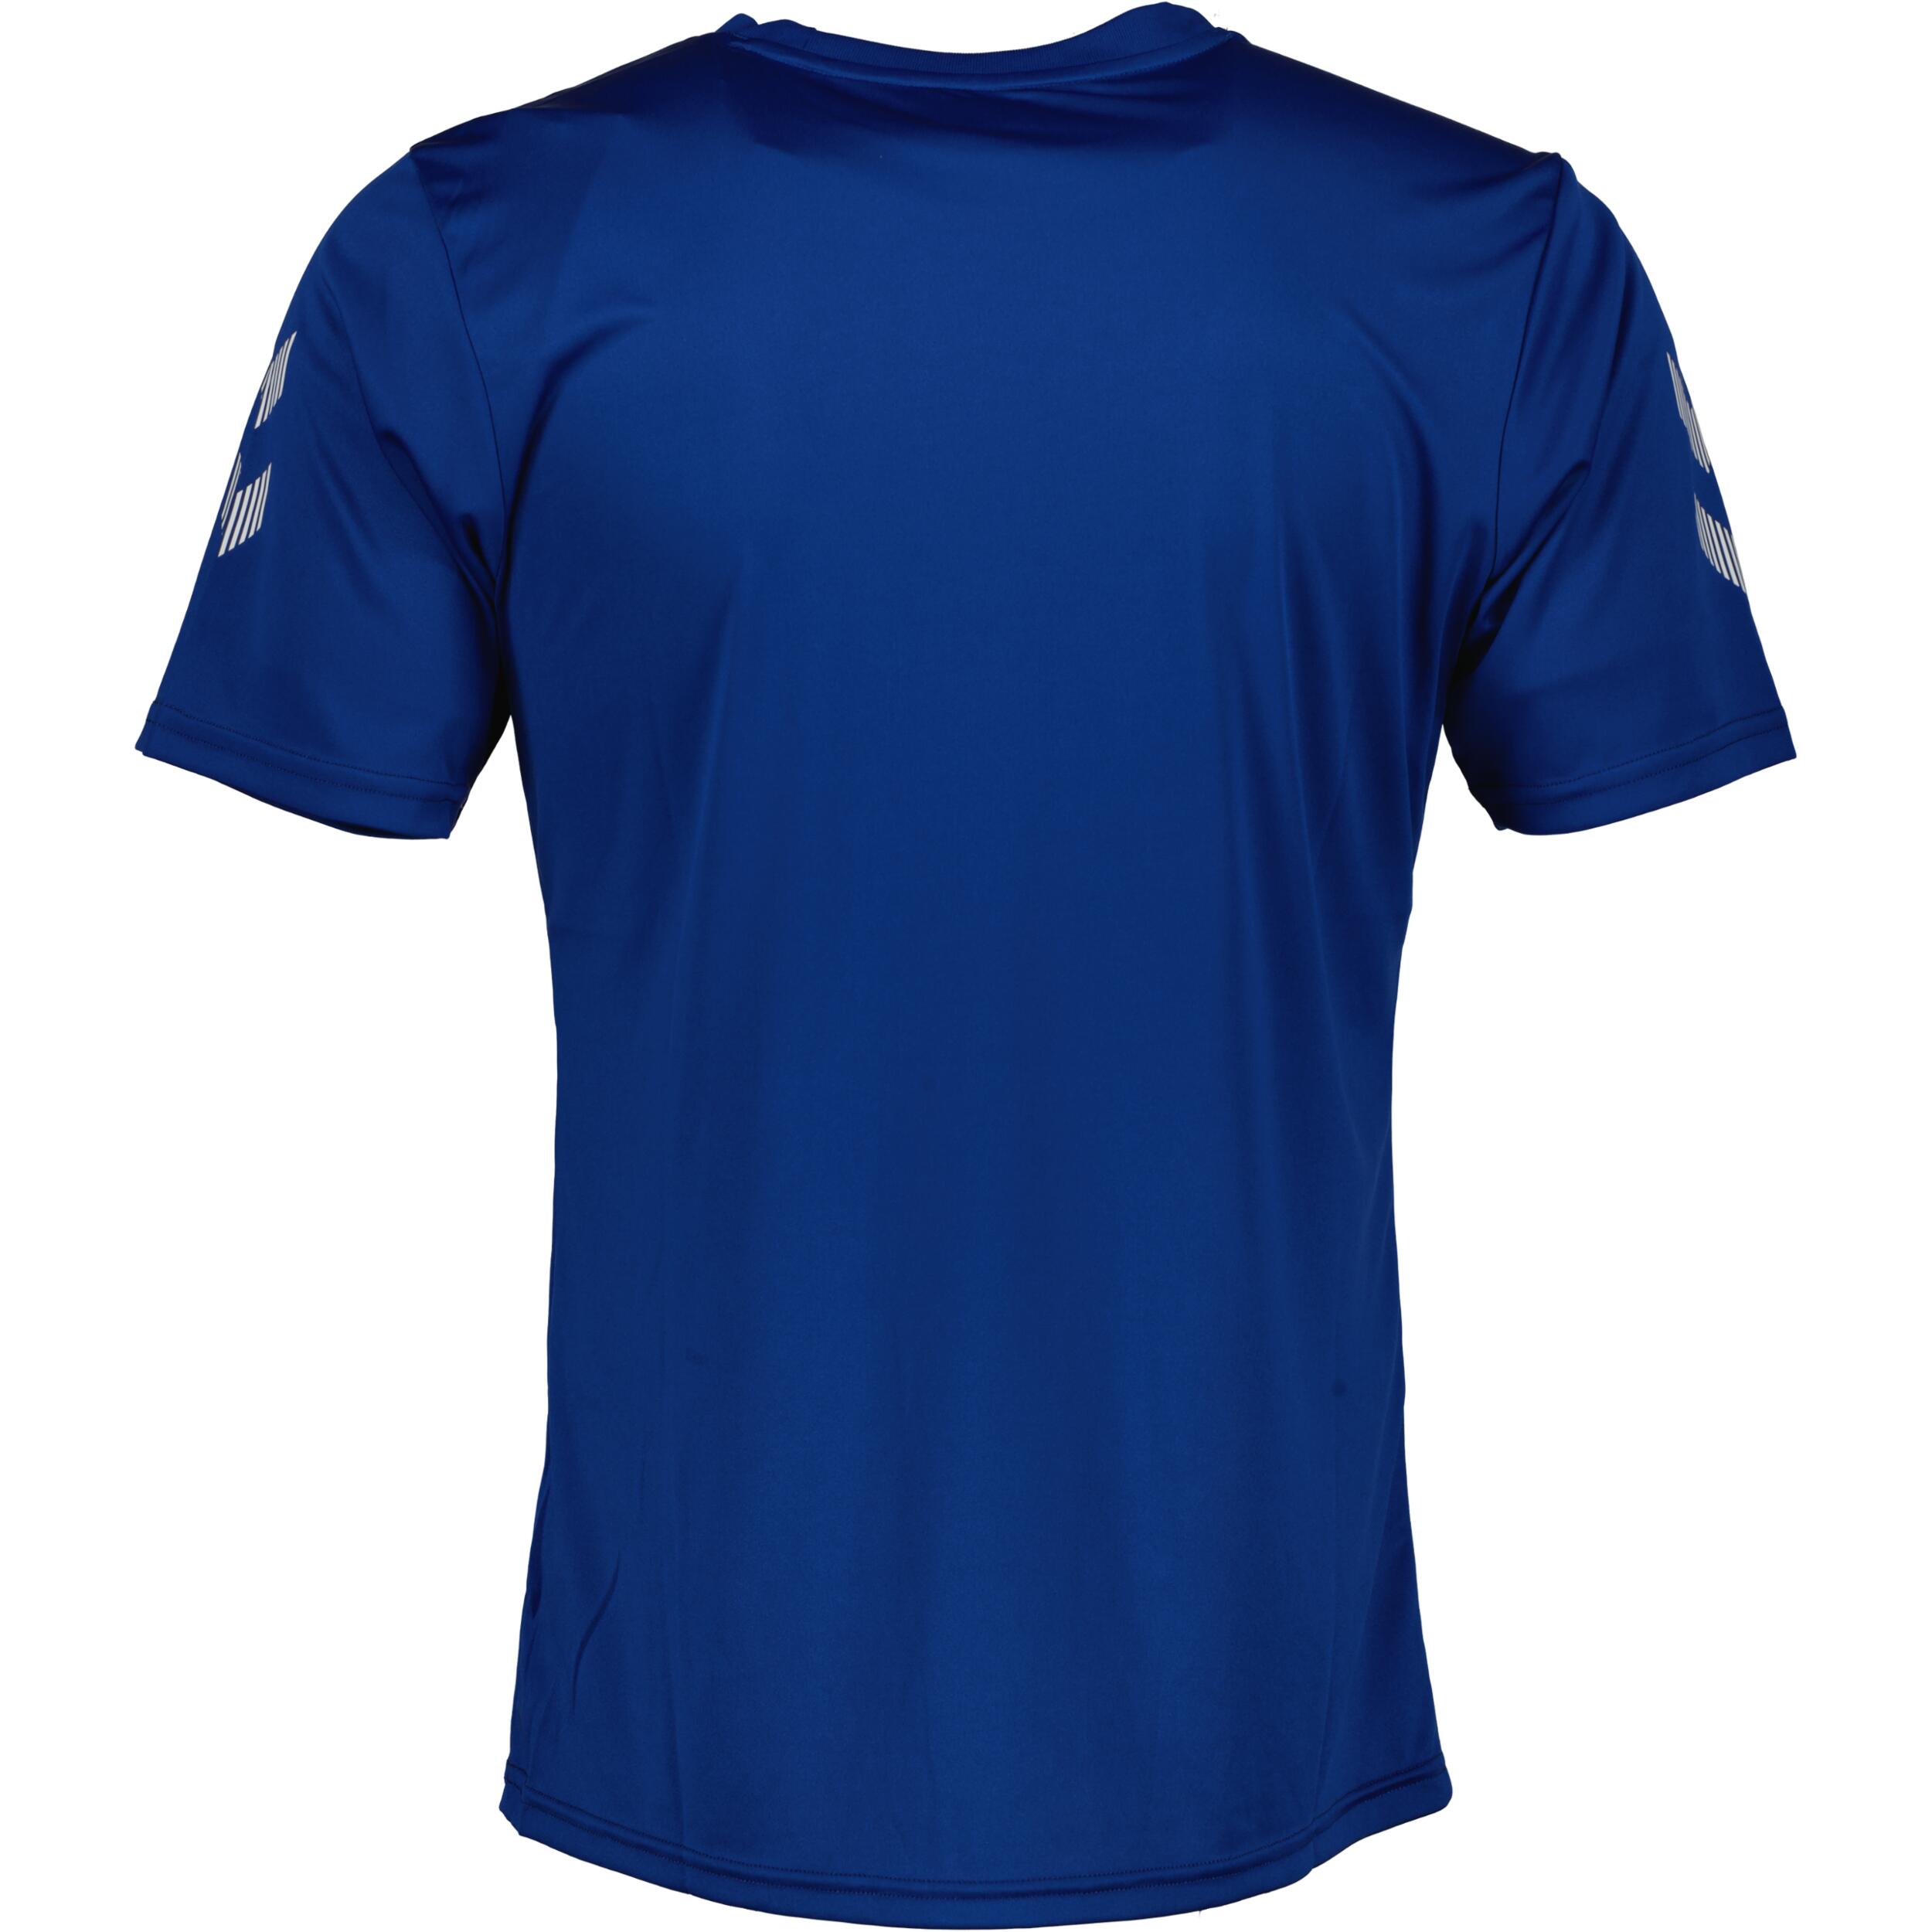 Solo jersey for men, great for football, in true blue 2/3